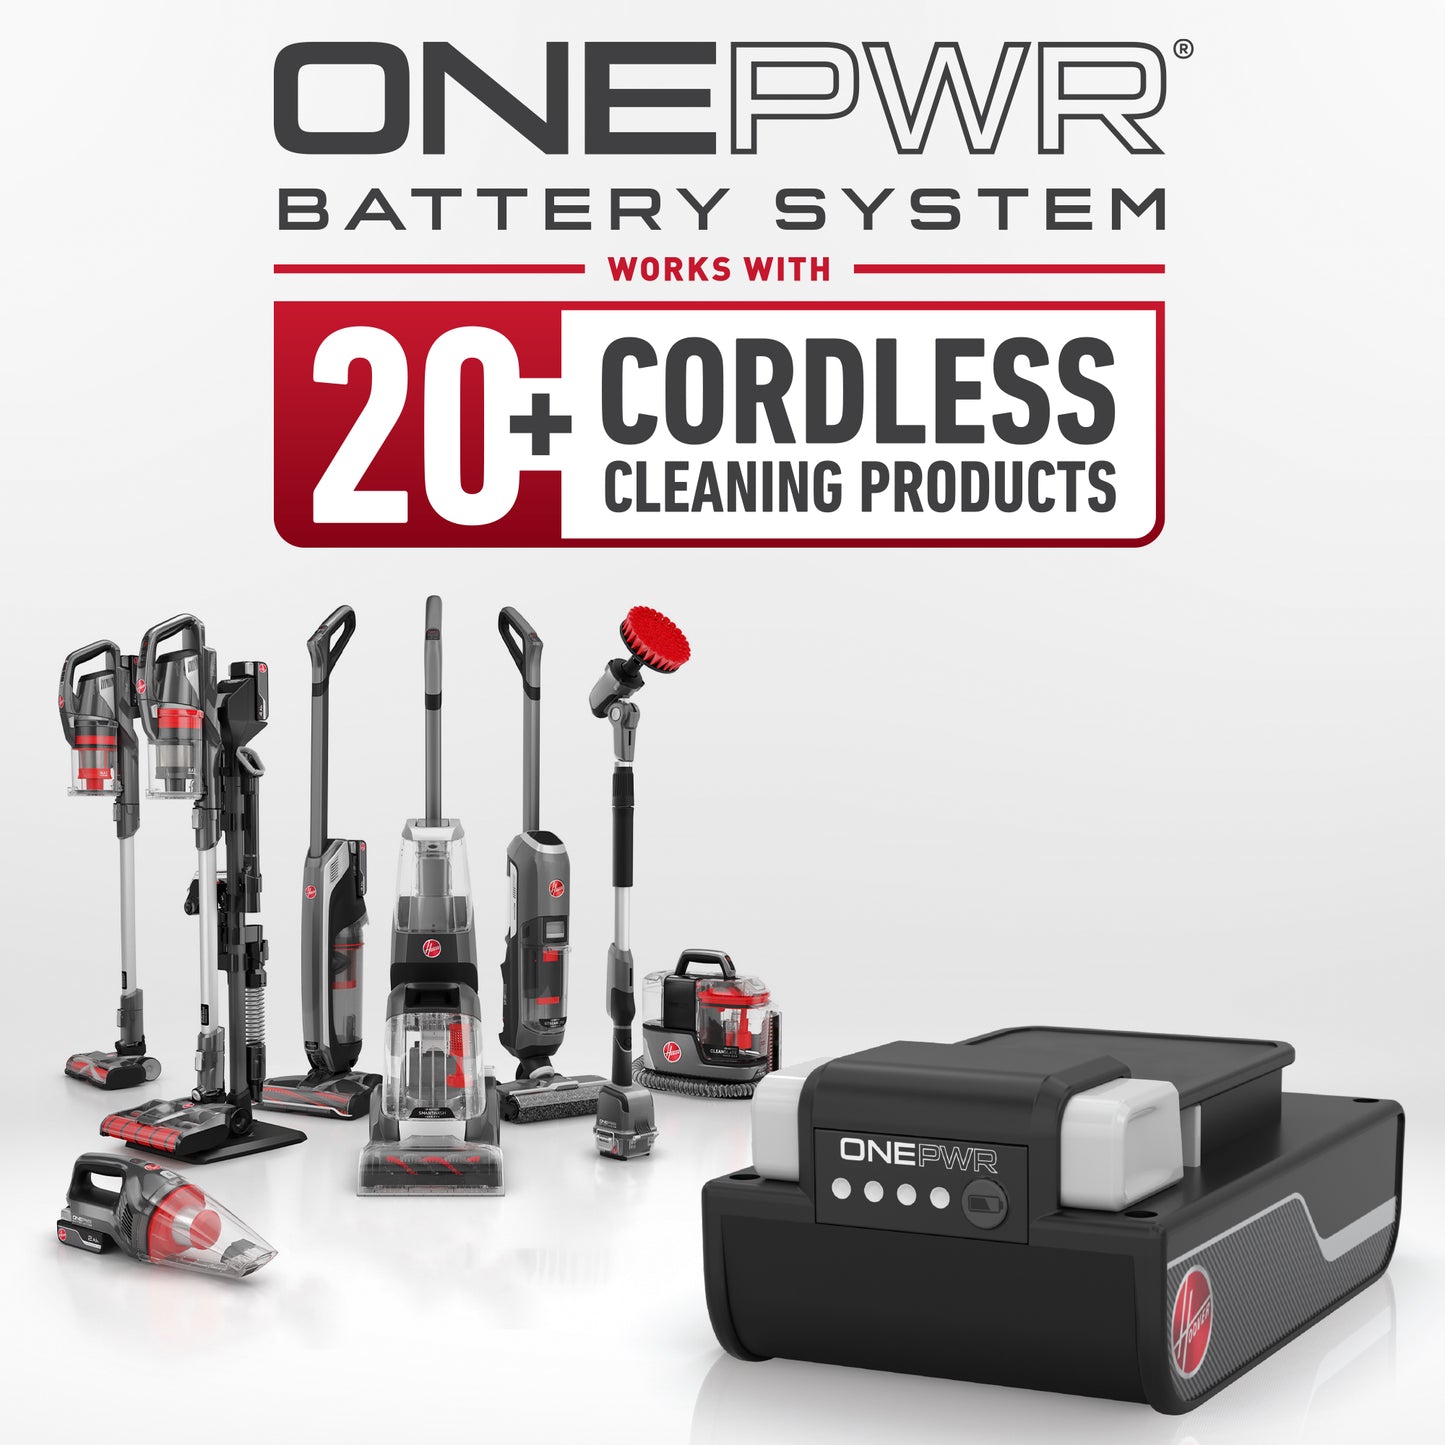 Hoover ONEPWR battery system is compatible with over 20 cordless cleaning products, displaying a range of 8 vacuums and cleaning tools the ONEPWR battery is compatible with 